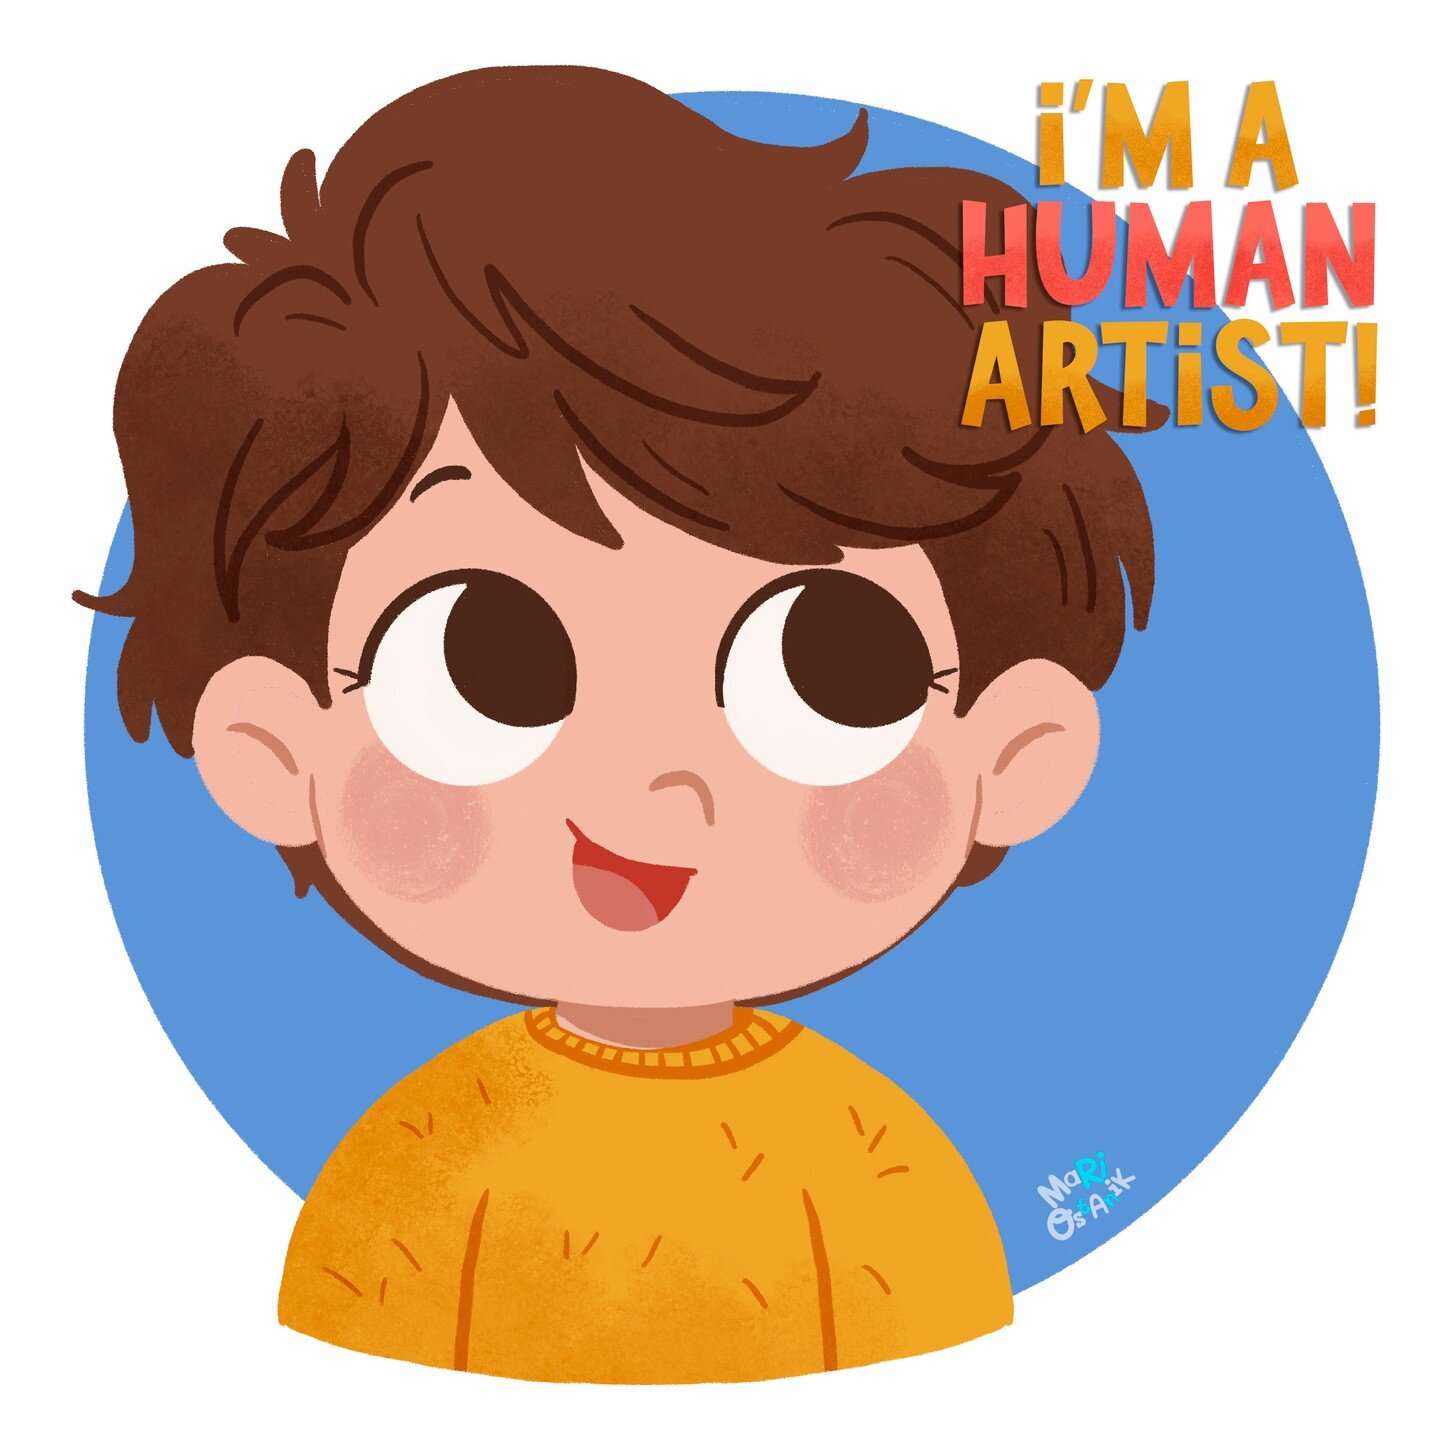 Joining @davideortuillustration movement for #iamahumanartist . I'm Mariana, a real person behind this account, who loves childhood and everything that makes toddlers and babies happier ❤️
.
.
.
#notoai #notoaiart #selfportrait #digitalartist #digita